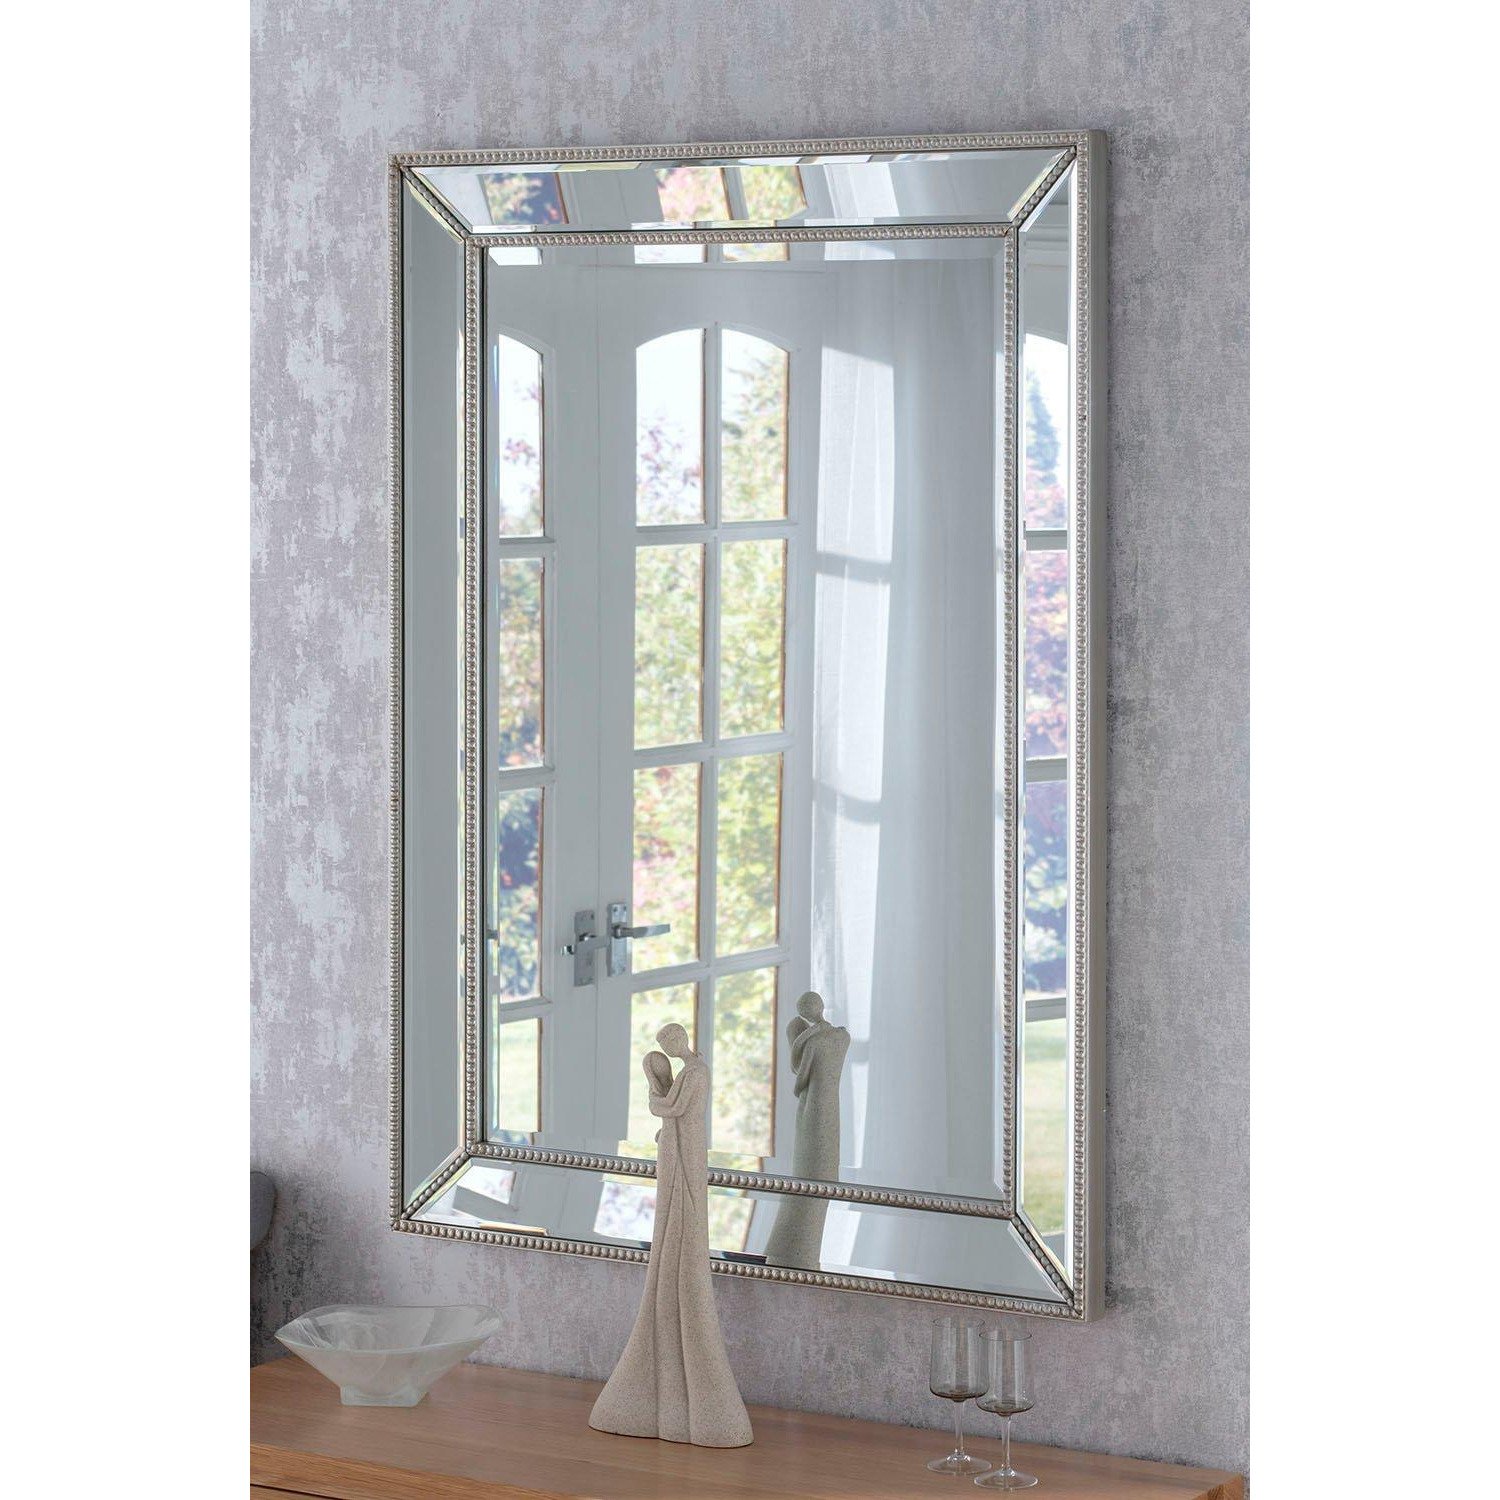 Beaded Angled Silver Mirror 69x94cm - image 1